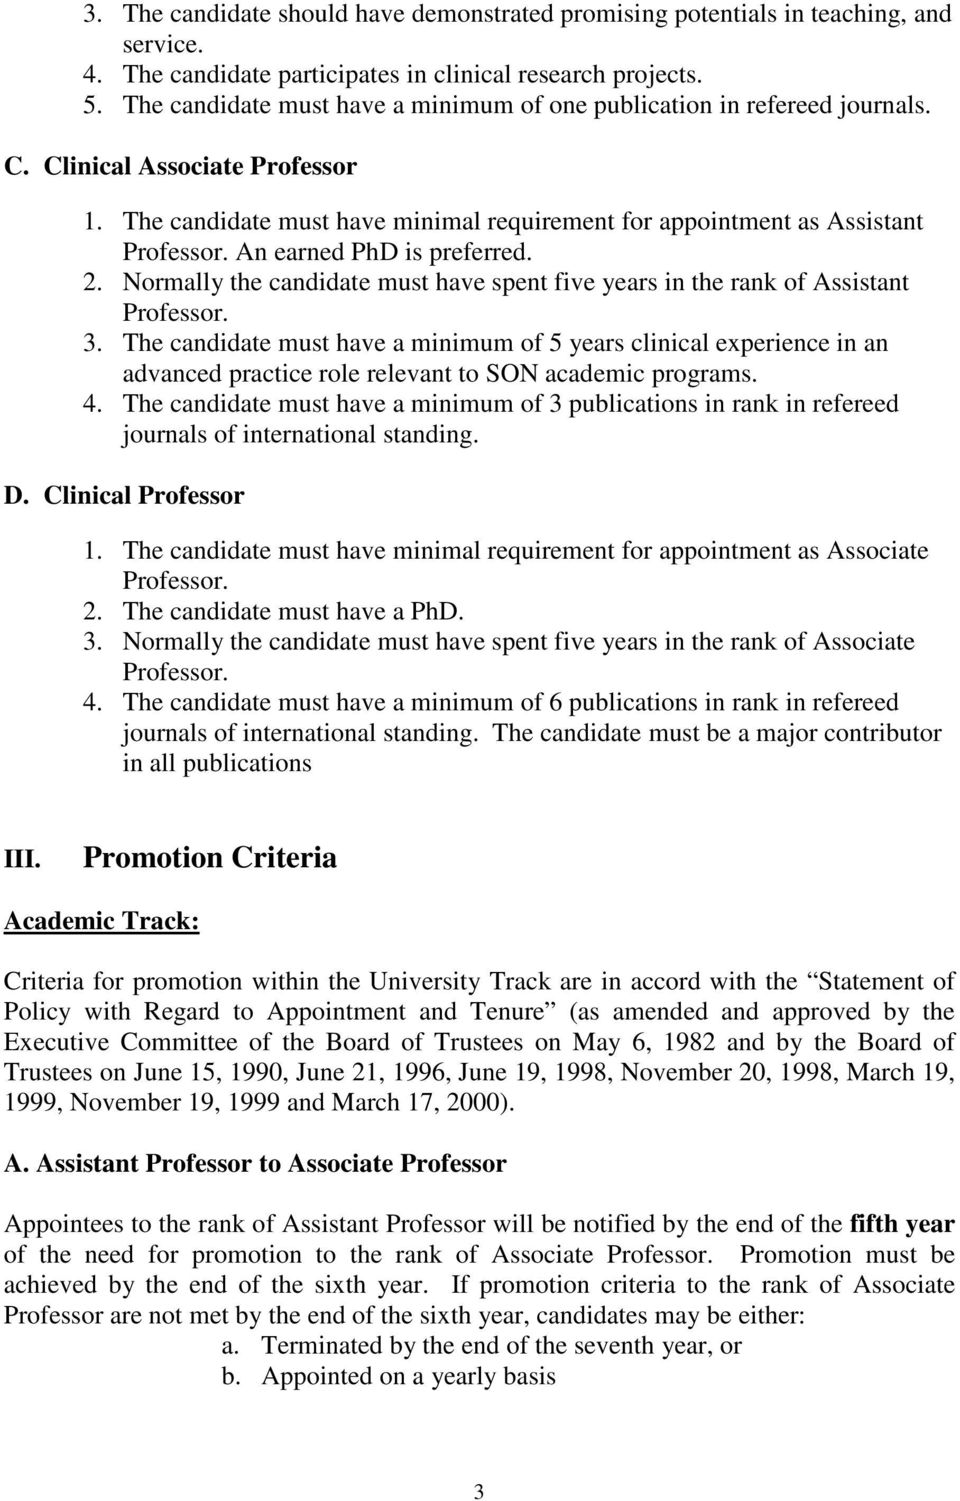 An earned PhD is preferred. 2. Normally the candidate must have spent five years in the rank of Assistant Professor. 3.